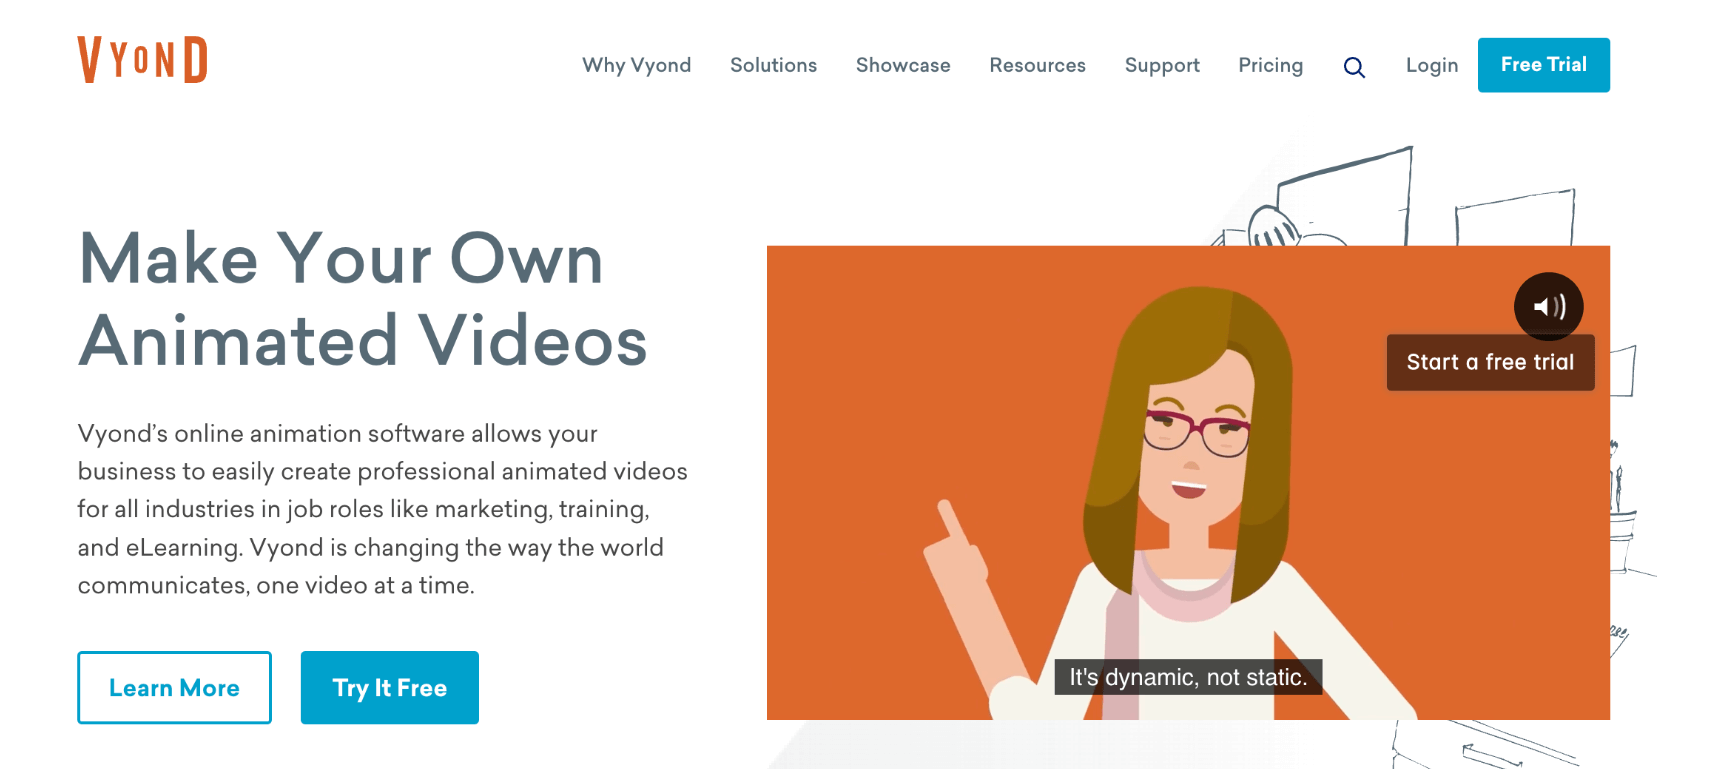 Vyond homepage: Make Your Own Animated Videos